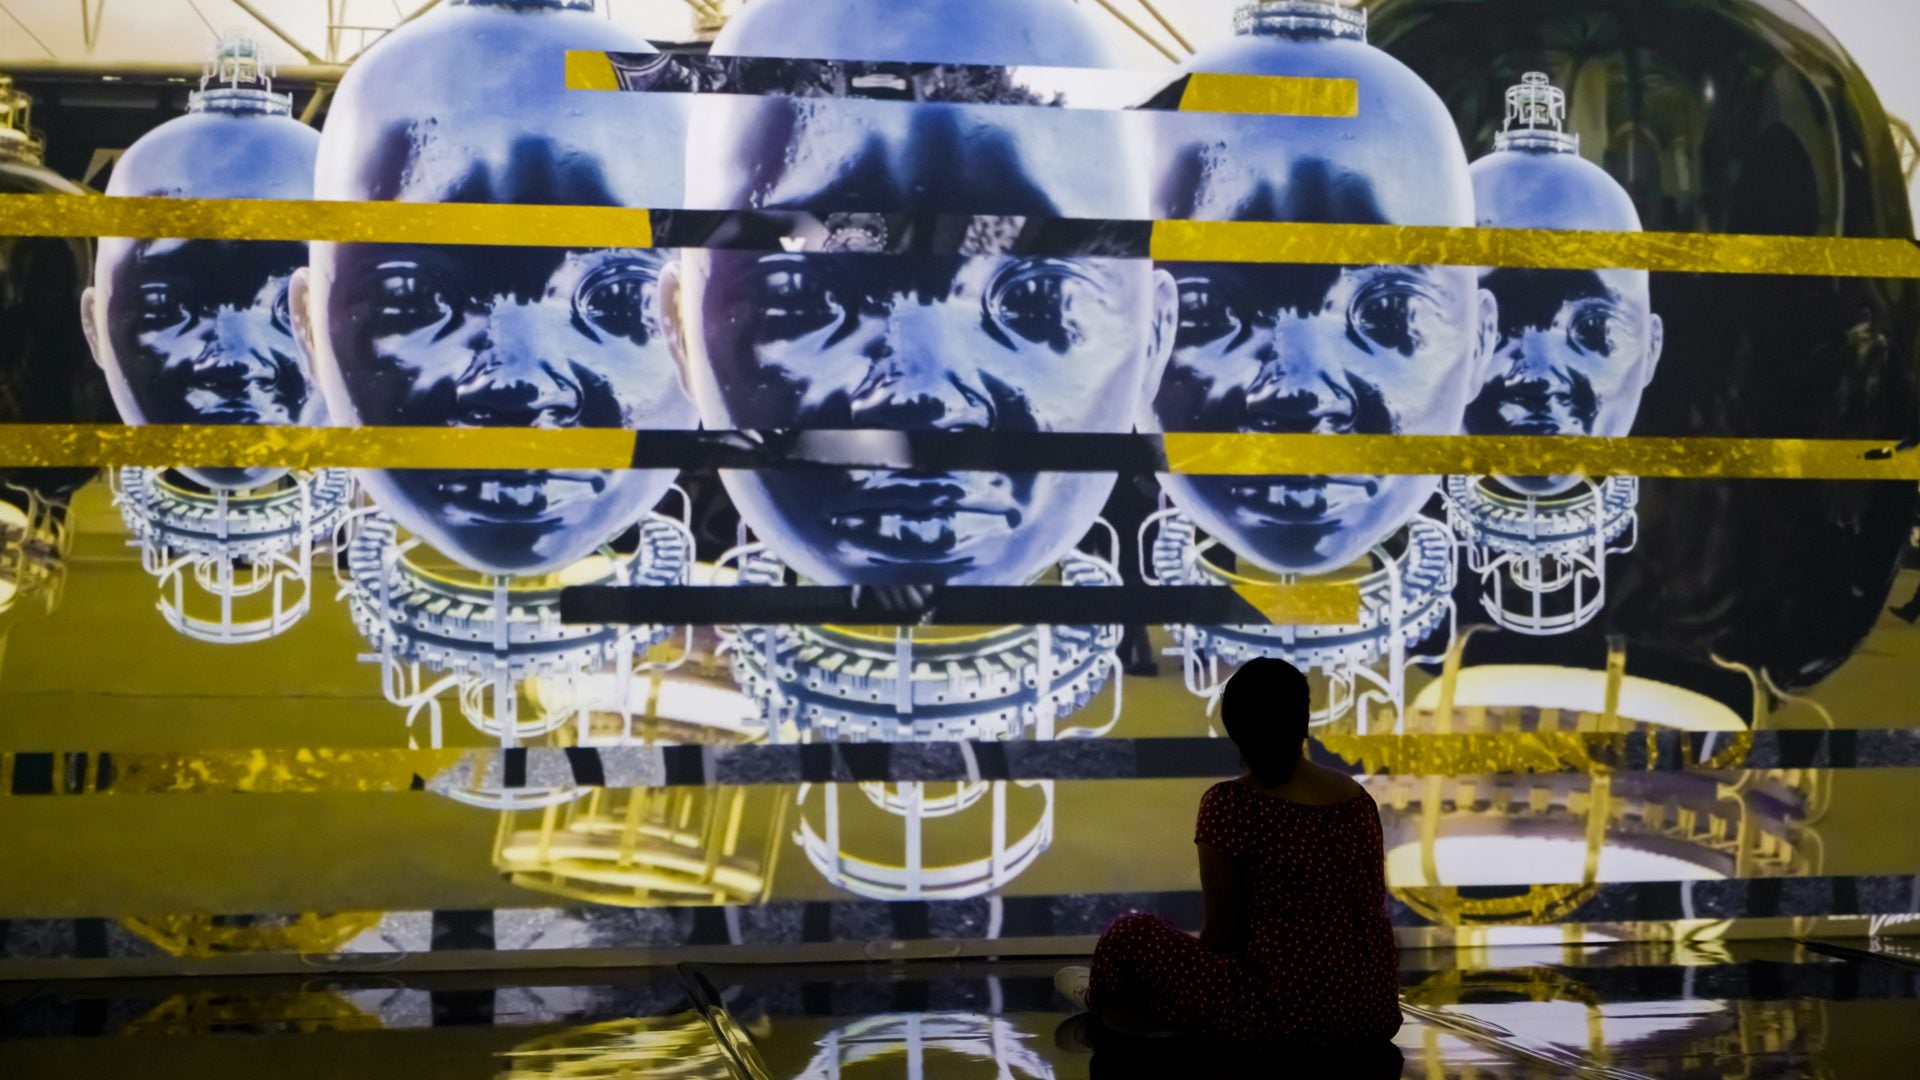 Black History Doesn't Start With Slavery. This New Pan-African Exhibit Blending Art and Technology Shows How.